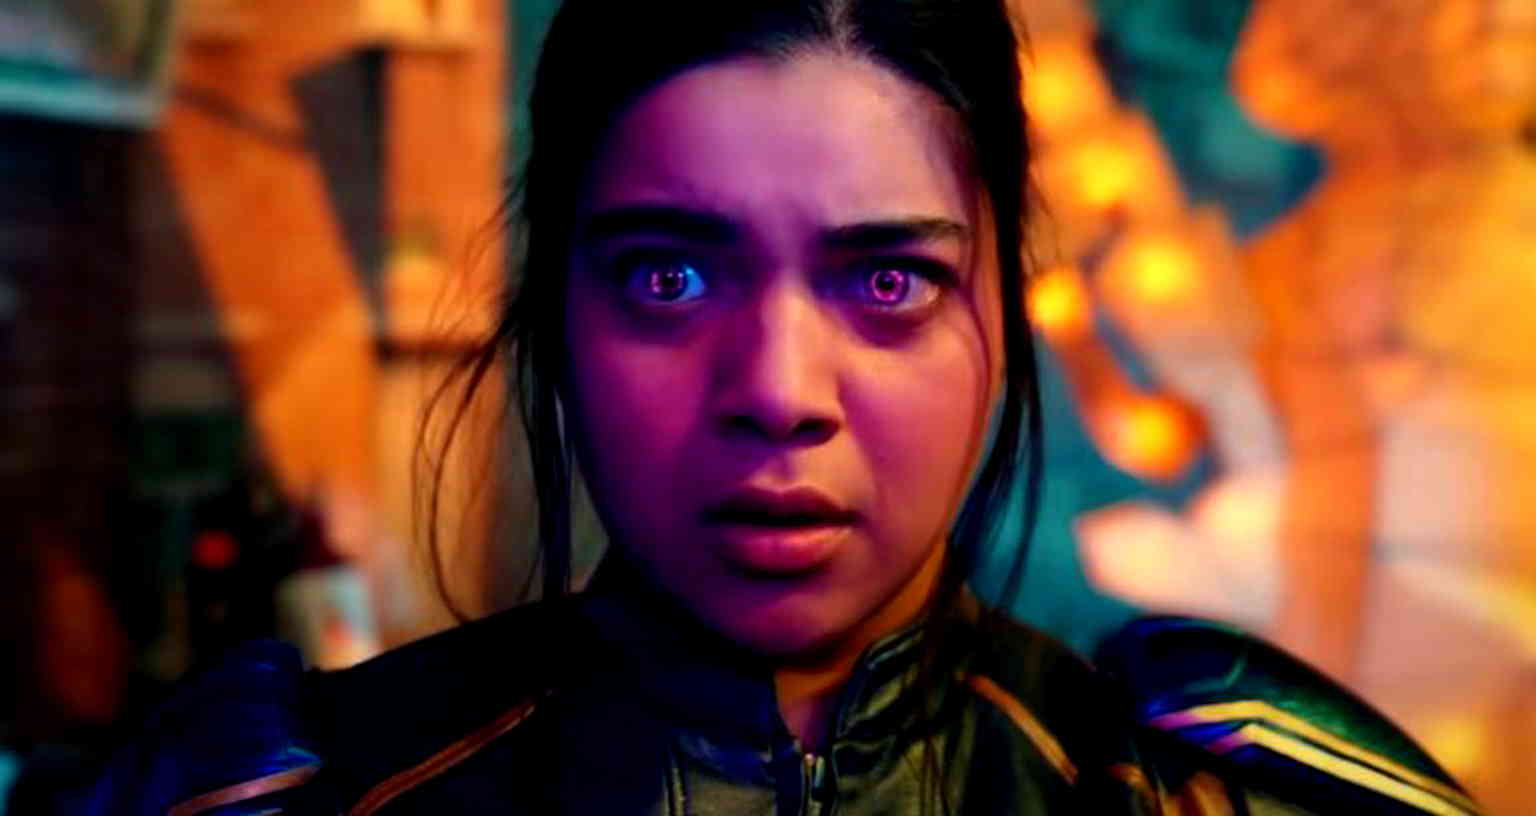 Disney’s ‘Ms. Marvel,’ featuring MCU’s first Muslim South Asian superhero, gets review bombed